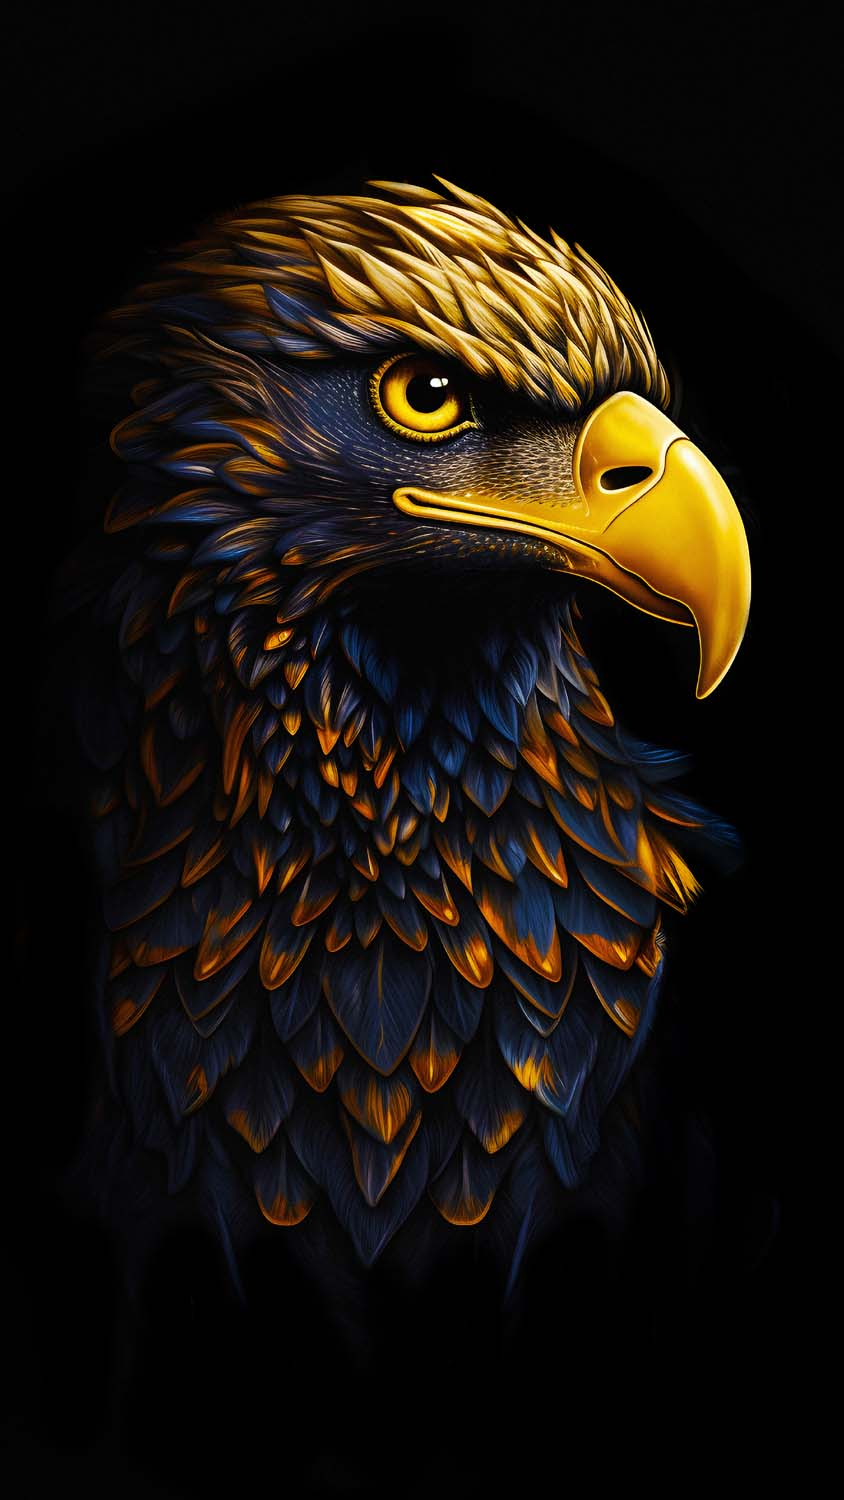 The Eagle IPhone Wallpaper 4K  IPhone Wallpapers